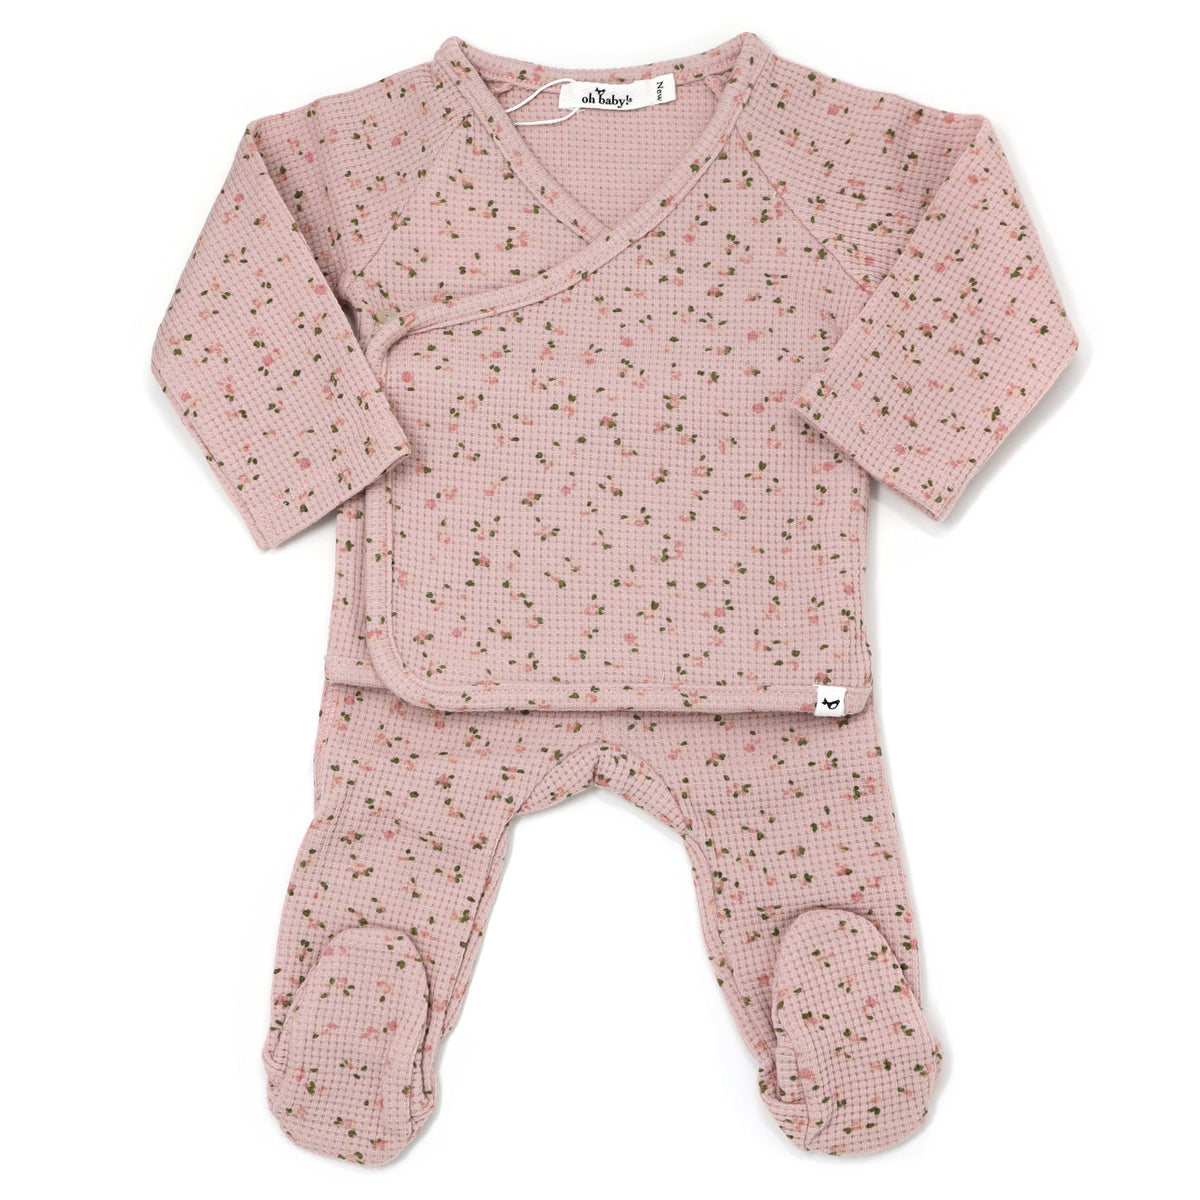 oh baby! Kimono Two Piece Footie Set - Waffle Knit - Roses - Blush